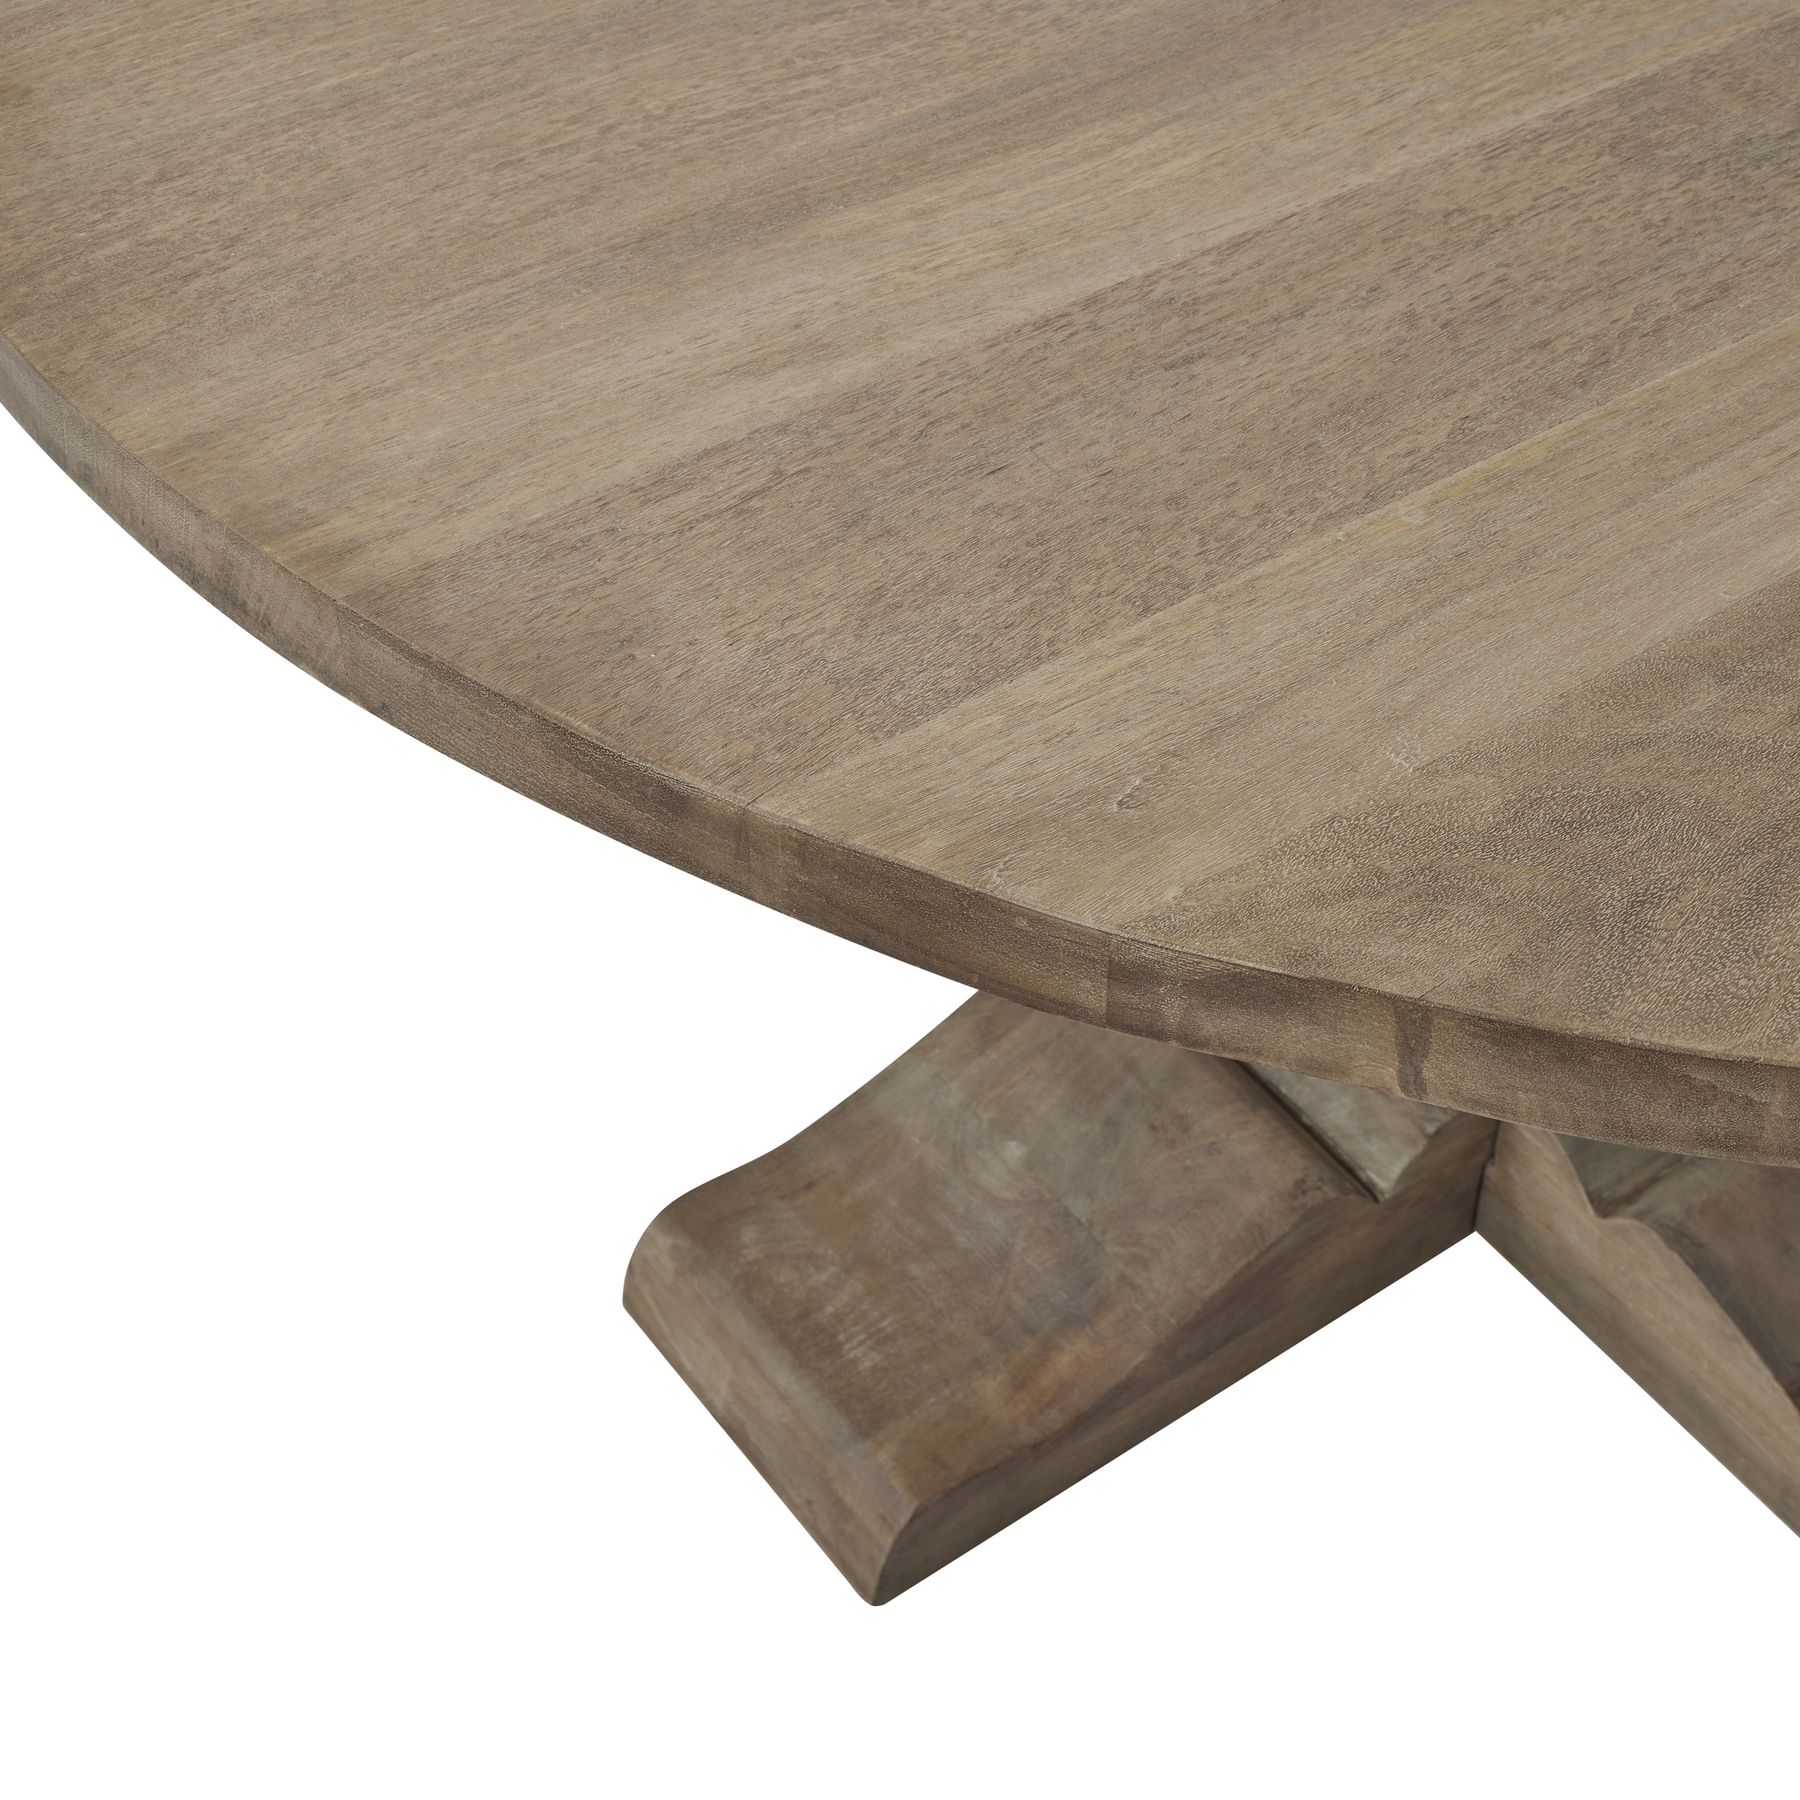 Copgrove Collection Round Pedestal Dining Table - Image 3